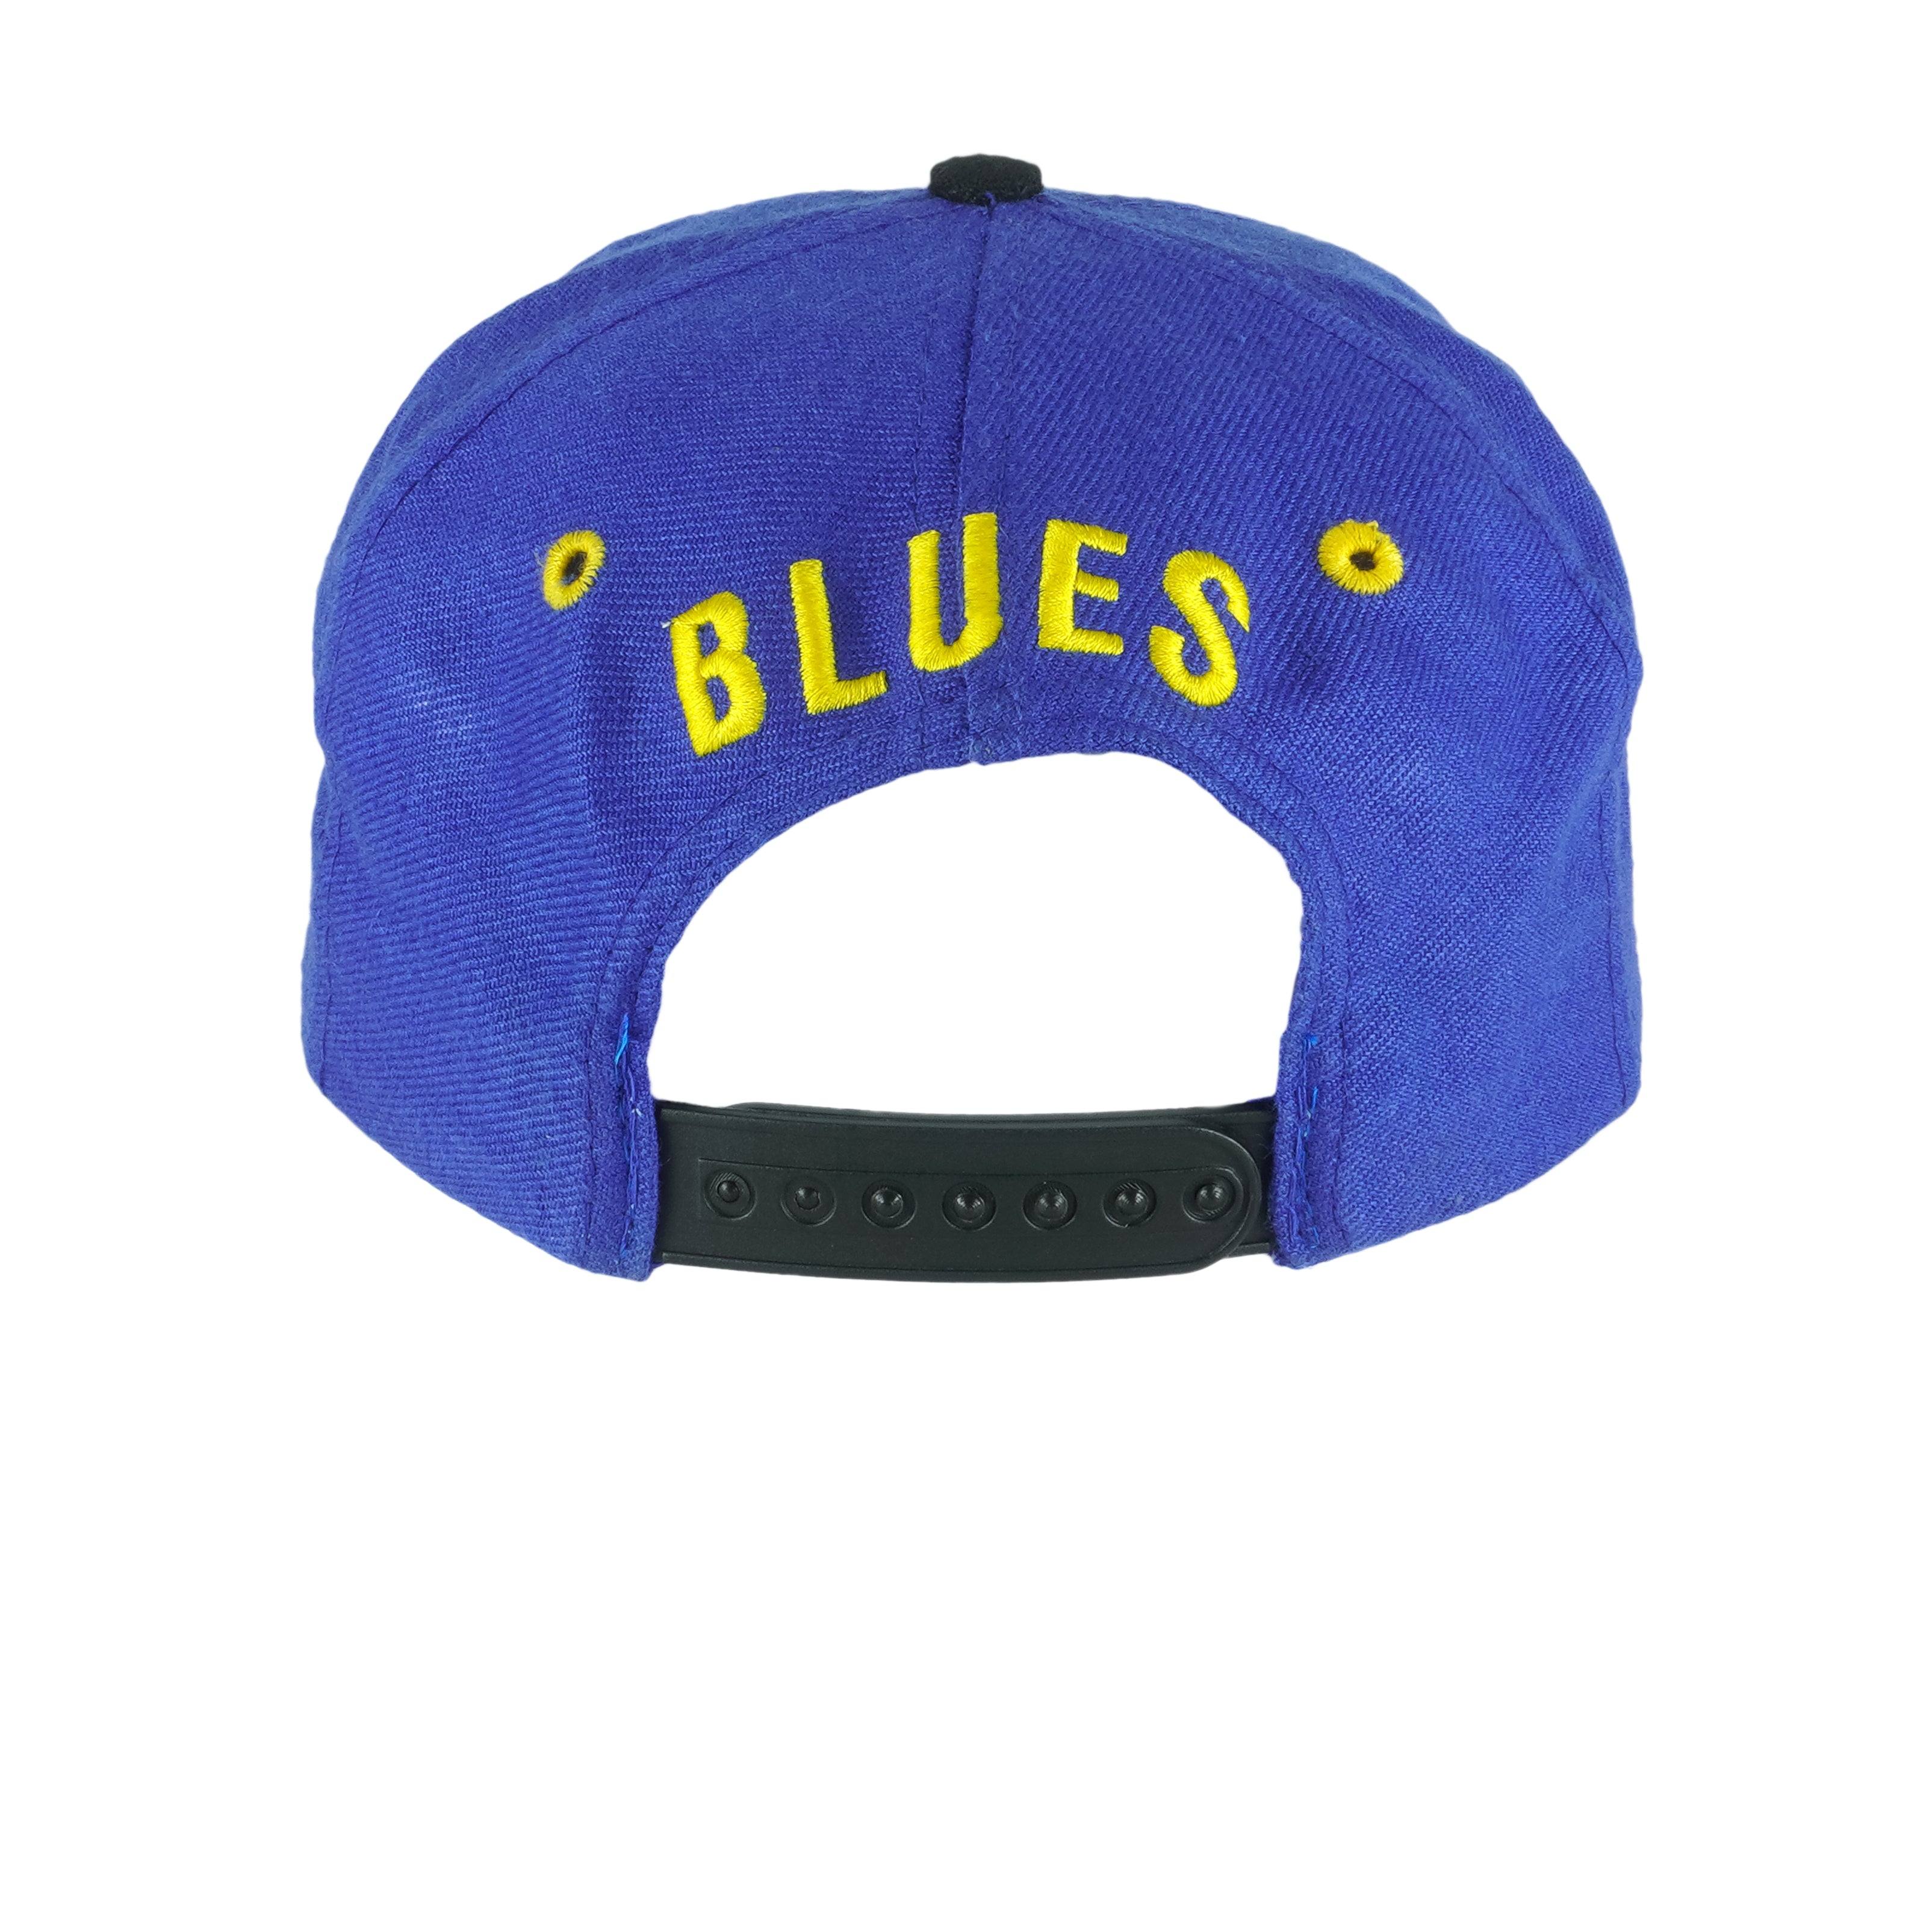 St. Louis Blues Signed Hats, Collectible Blues Hats